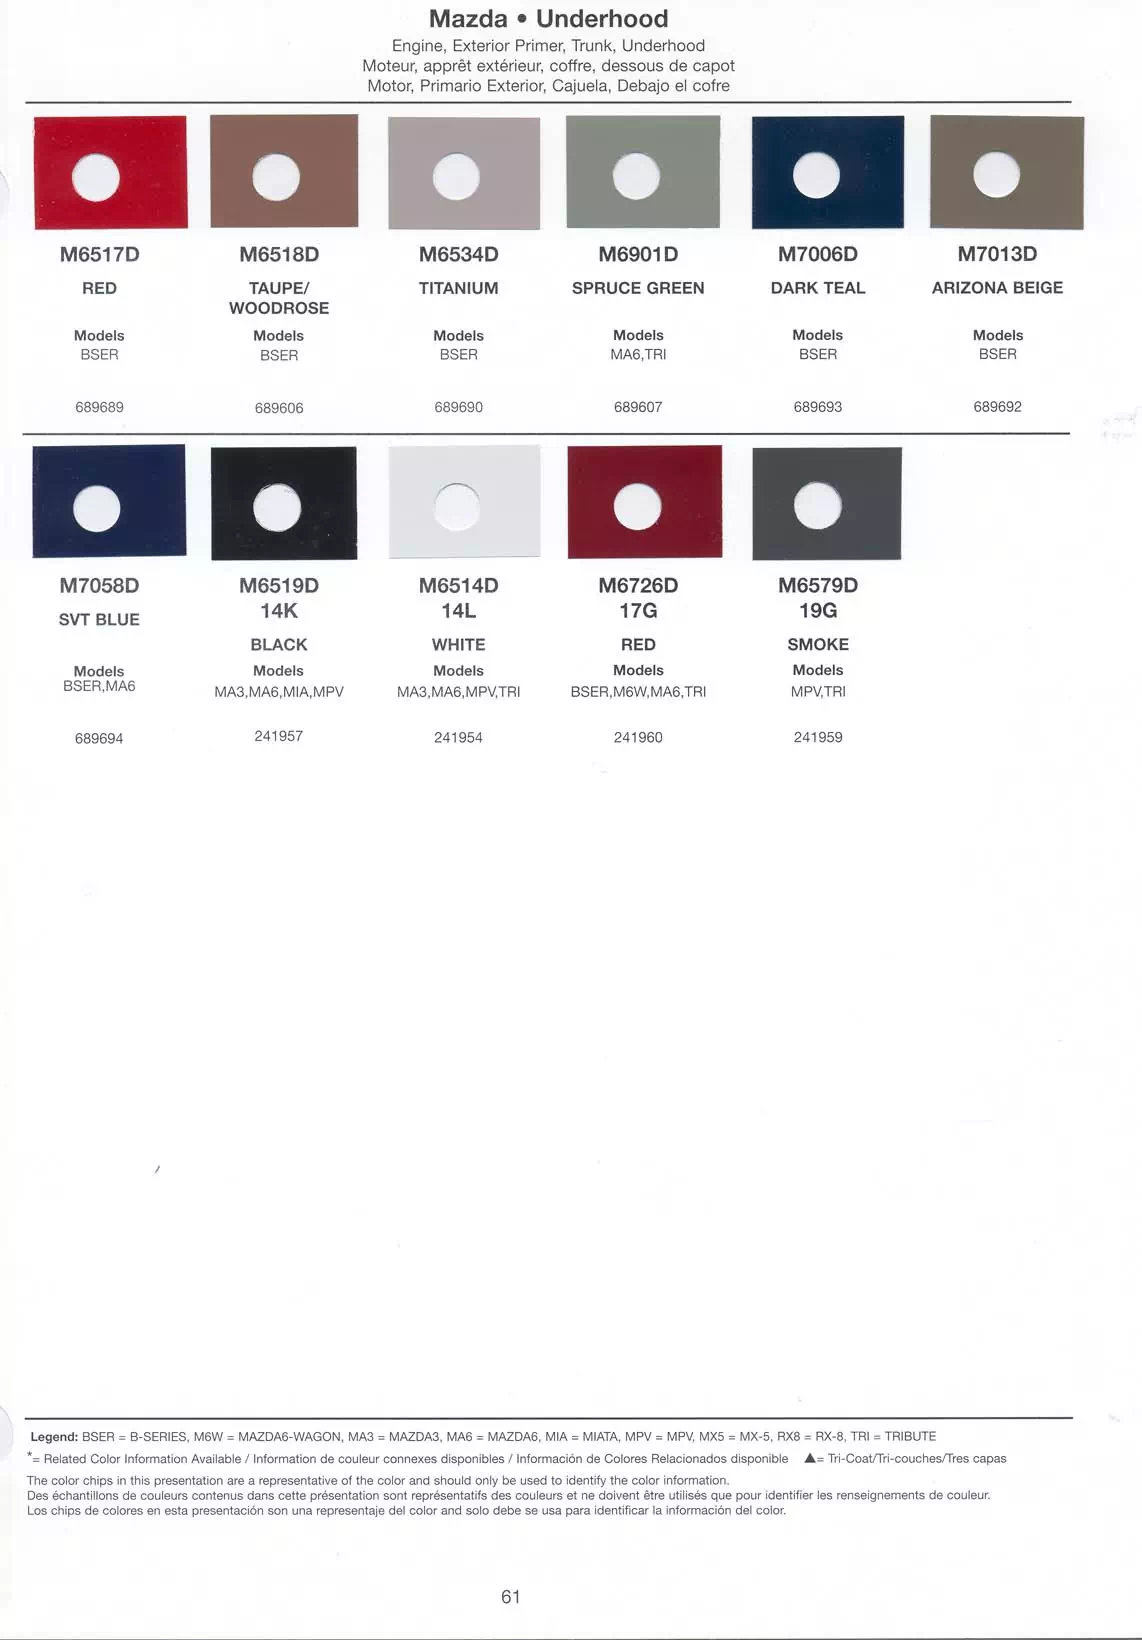 oem paint swatches (chart) paint codes and color names for all 2005 Mazda Vehicles